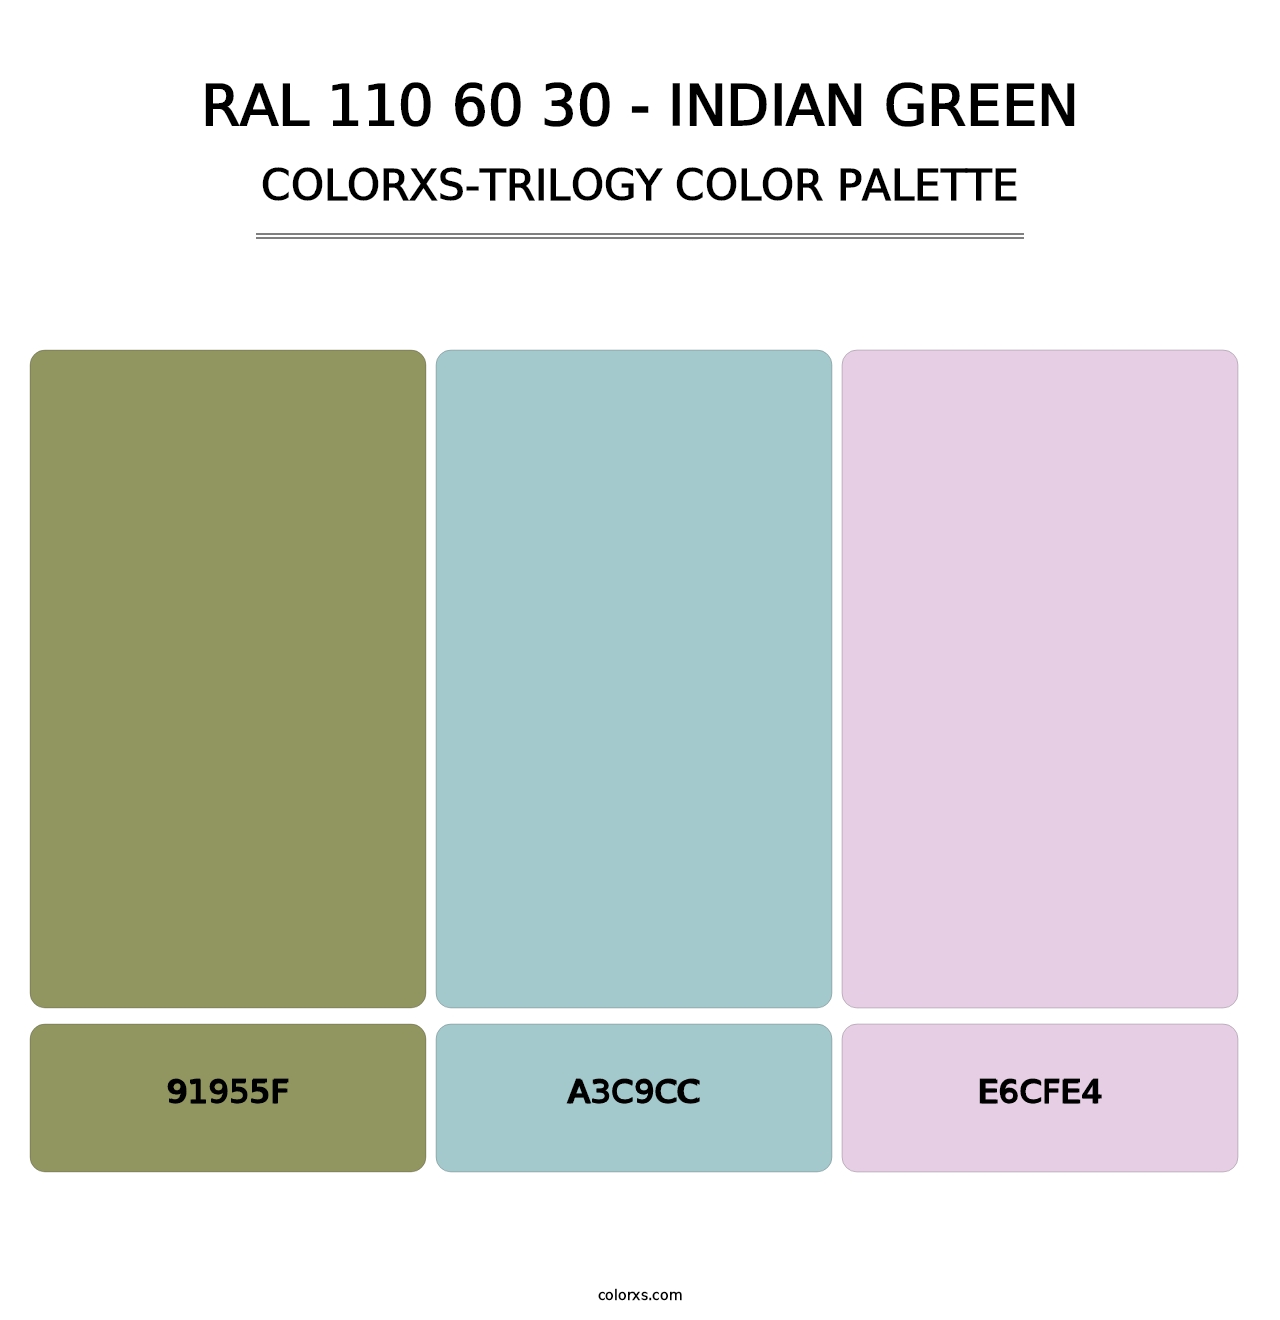 RAL 110 60 30 - Indian Green - Colorxs Trilogy Palette